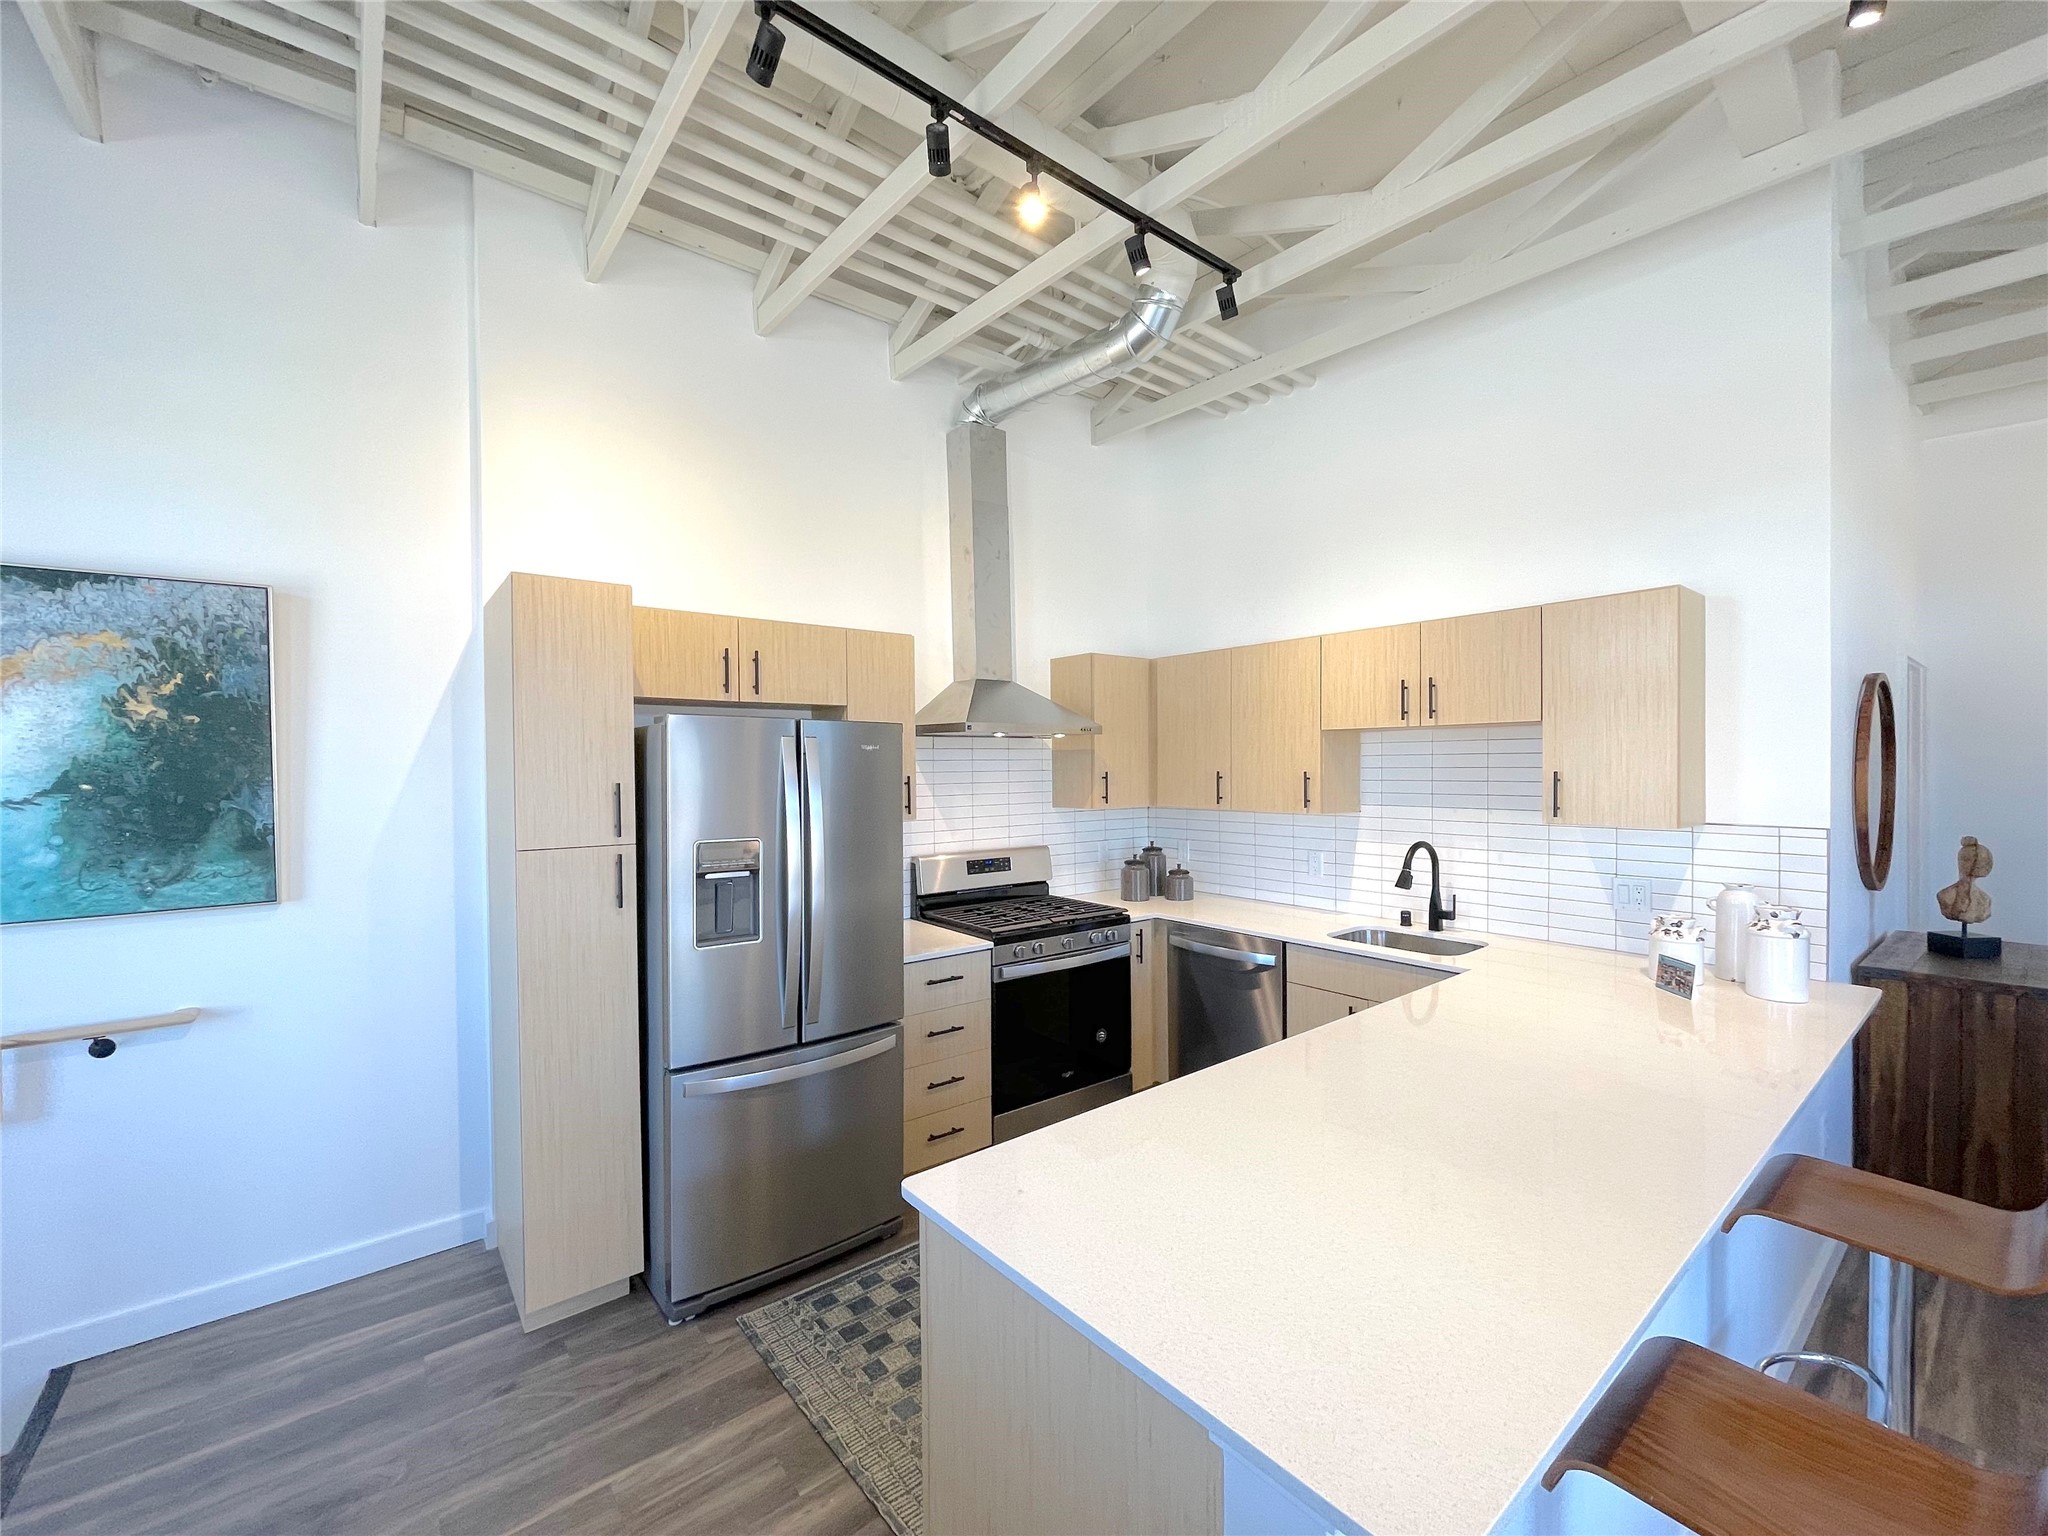 Second Floor – Kitchen with stainless steel appliances